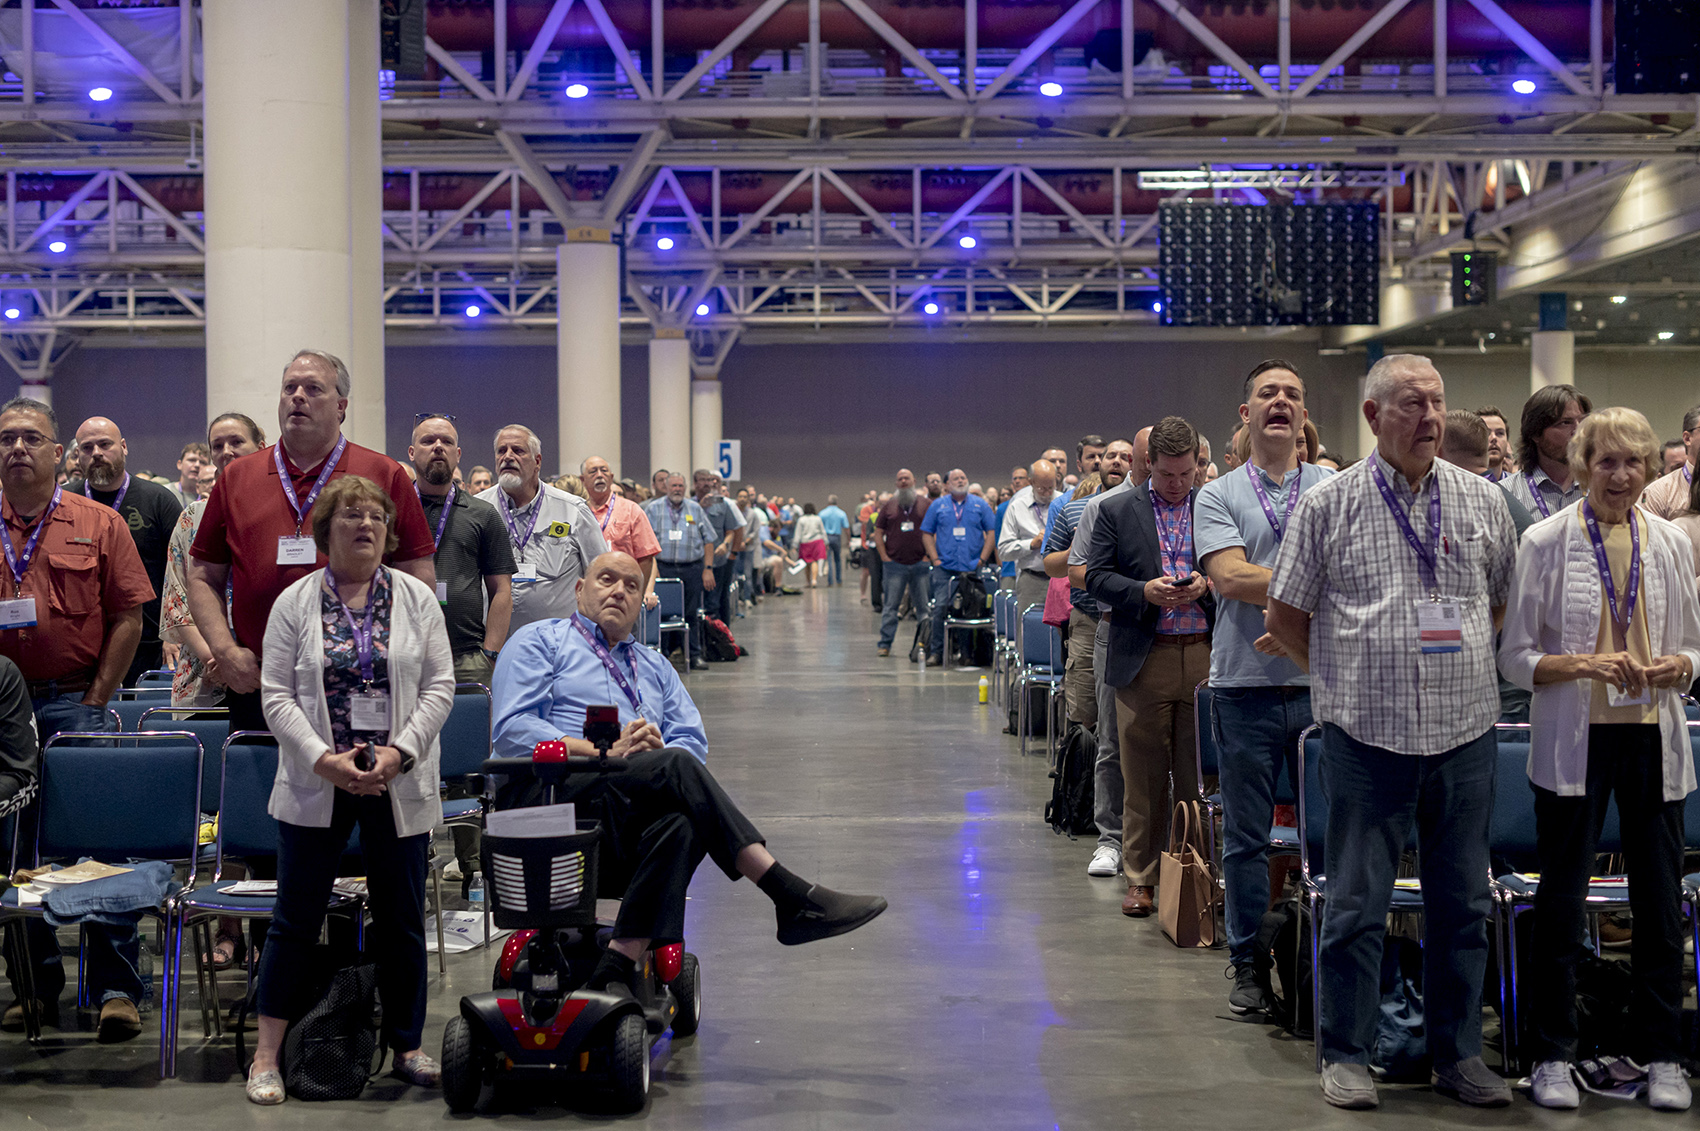 Messengers attend the Southern Baptist Convention annual meeting at the Ernest N. Morial Convention Center in New Orleans, Wednesday, June 14, 2023. RNS photo by Emily Kask